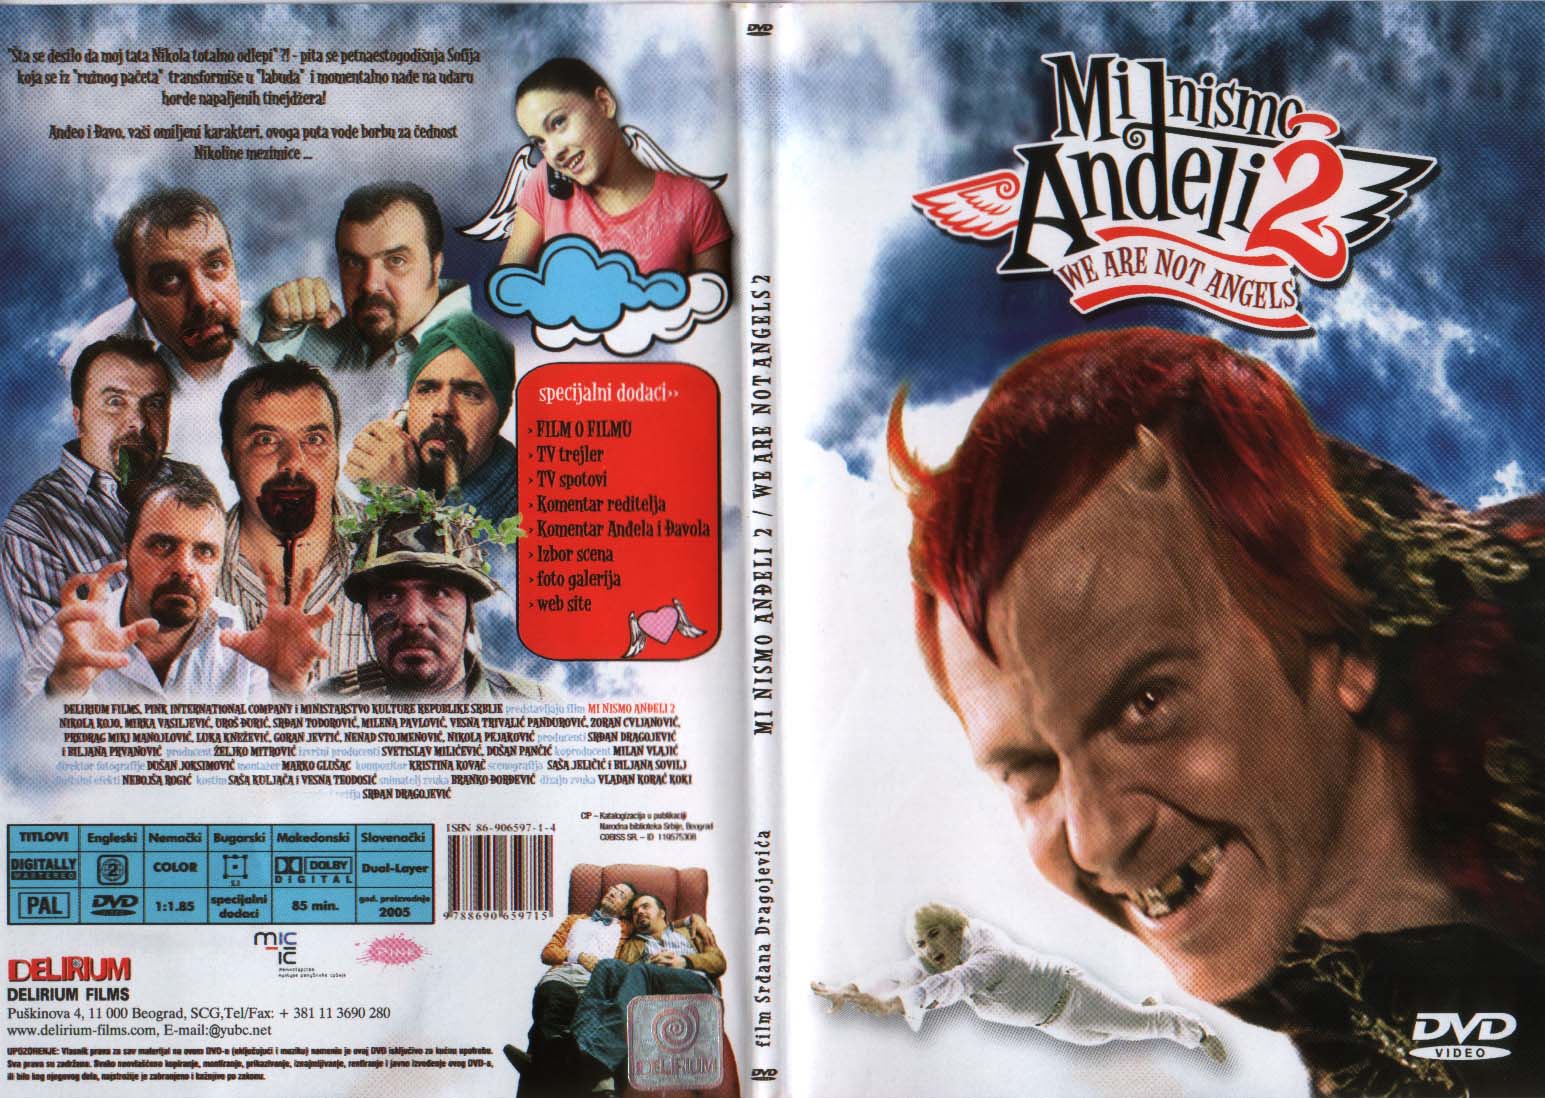 Click to view full size image -  DVD Cover - M - DVD - MI NISMO ANDJELI 2 - DVD - MI NISMO ANDJELI 2.jpg